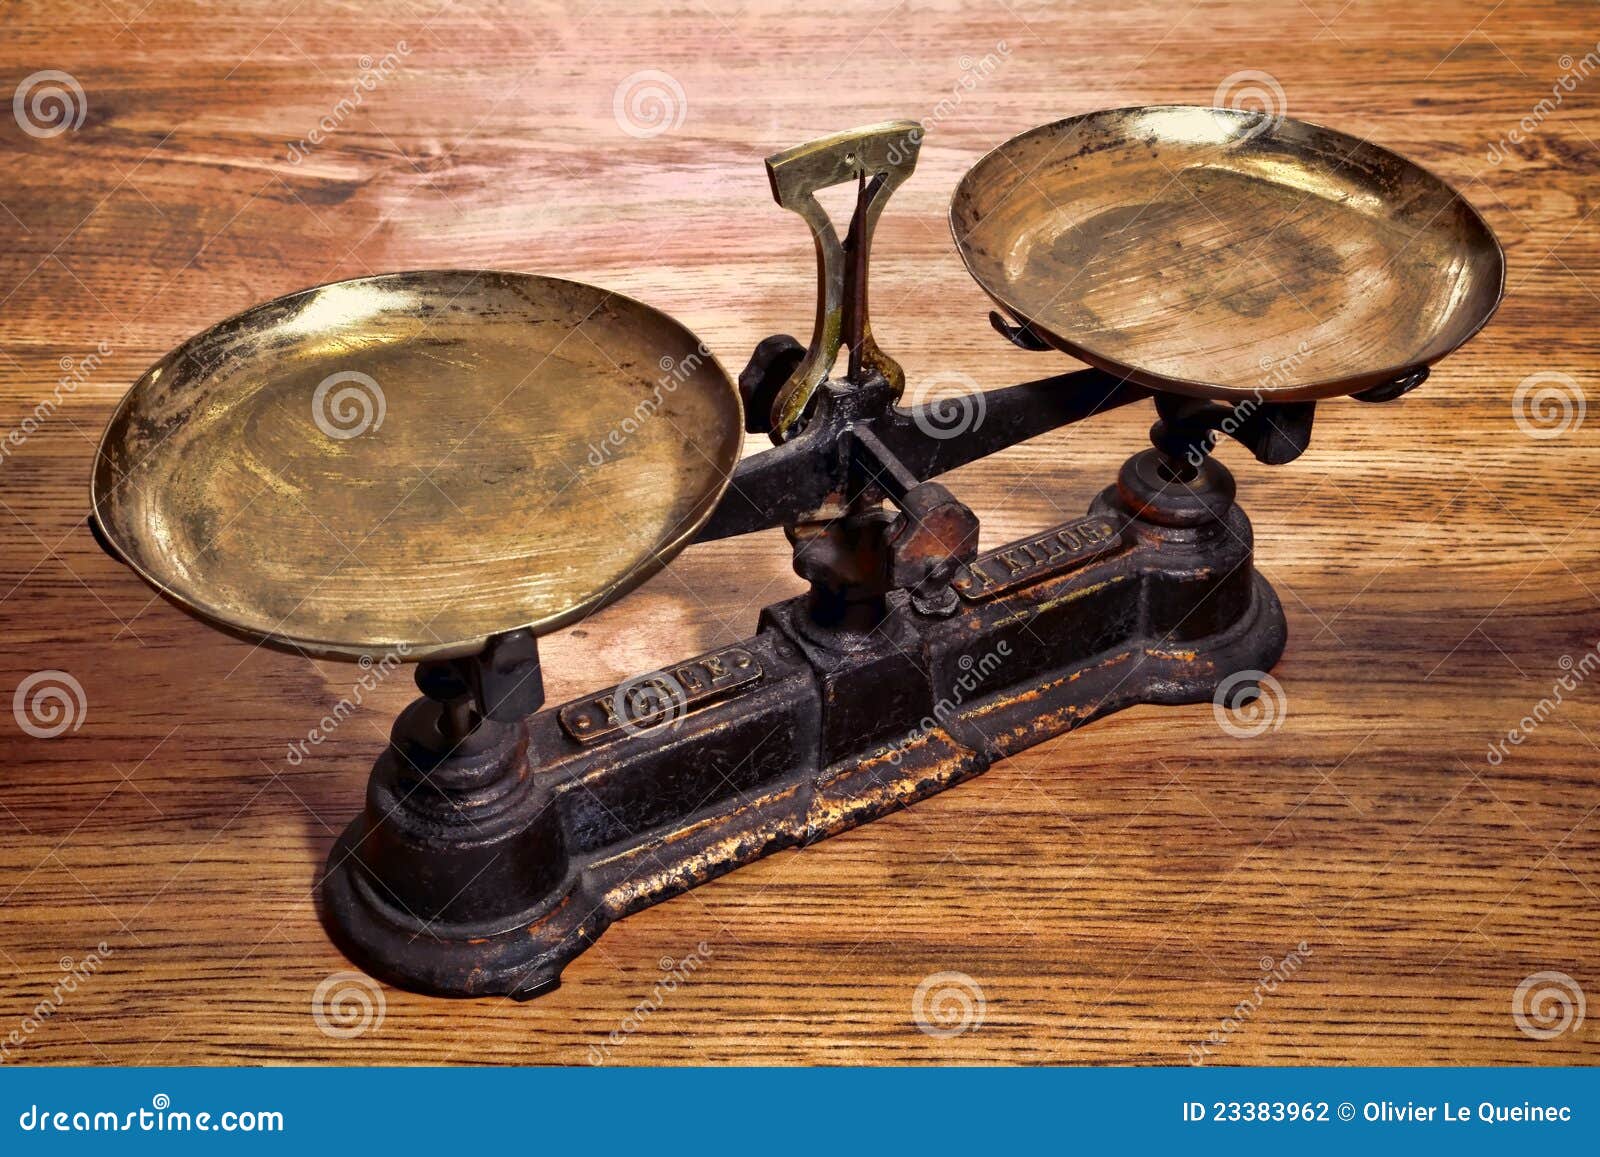 https://thumbs.dreamstime.com/z/old-antique-weight-measuring-brass-iron-scale-23383962.jpg